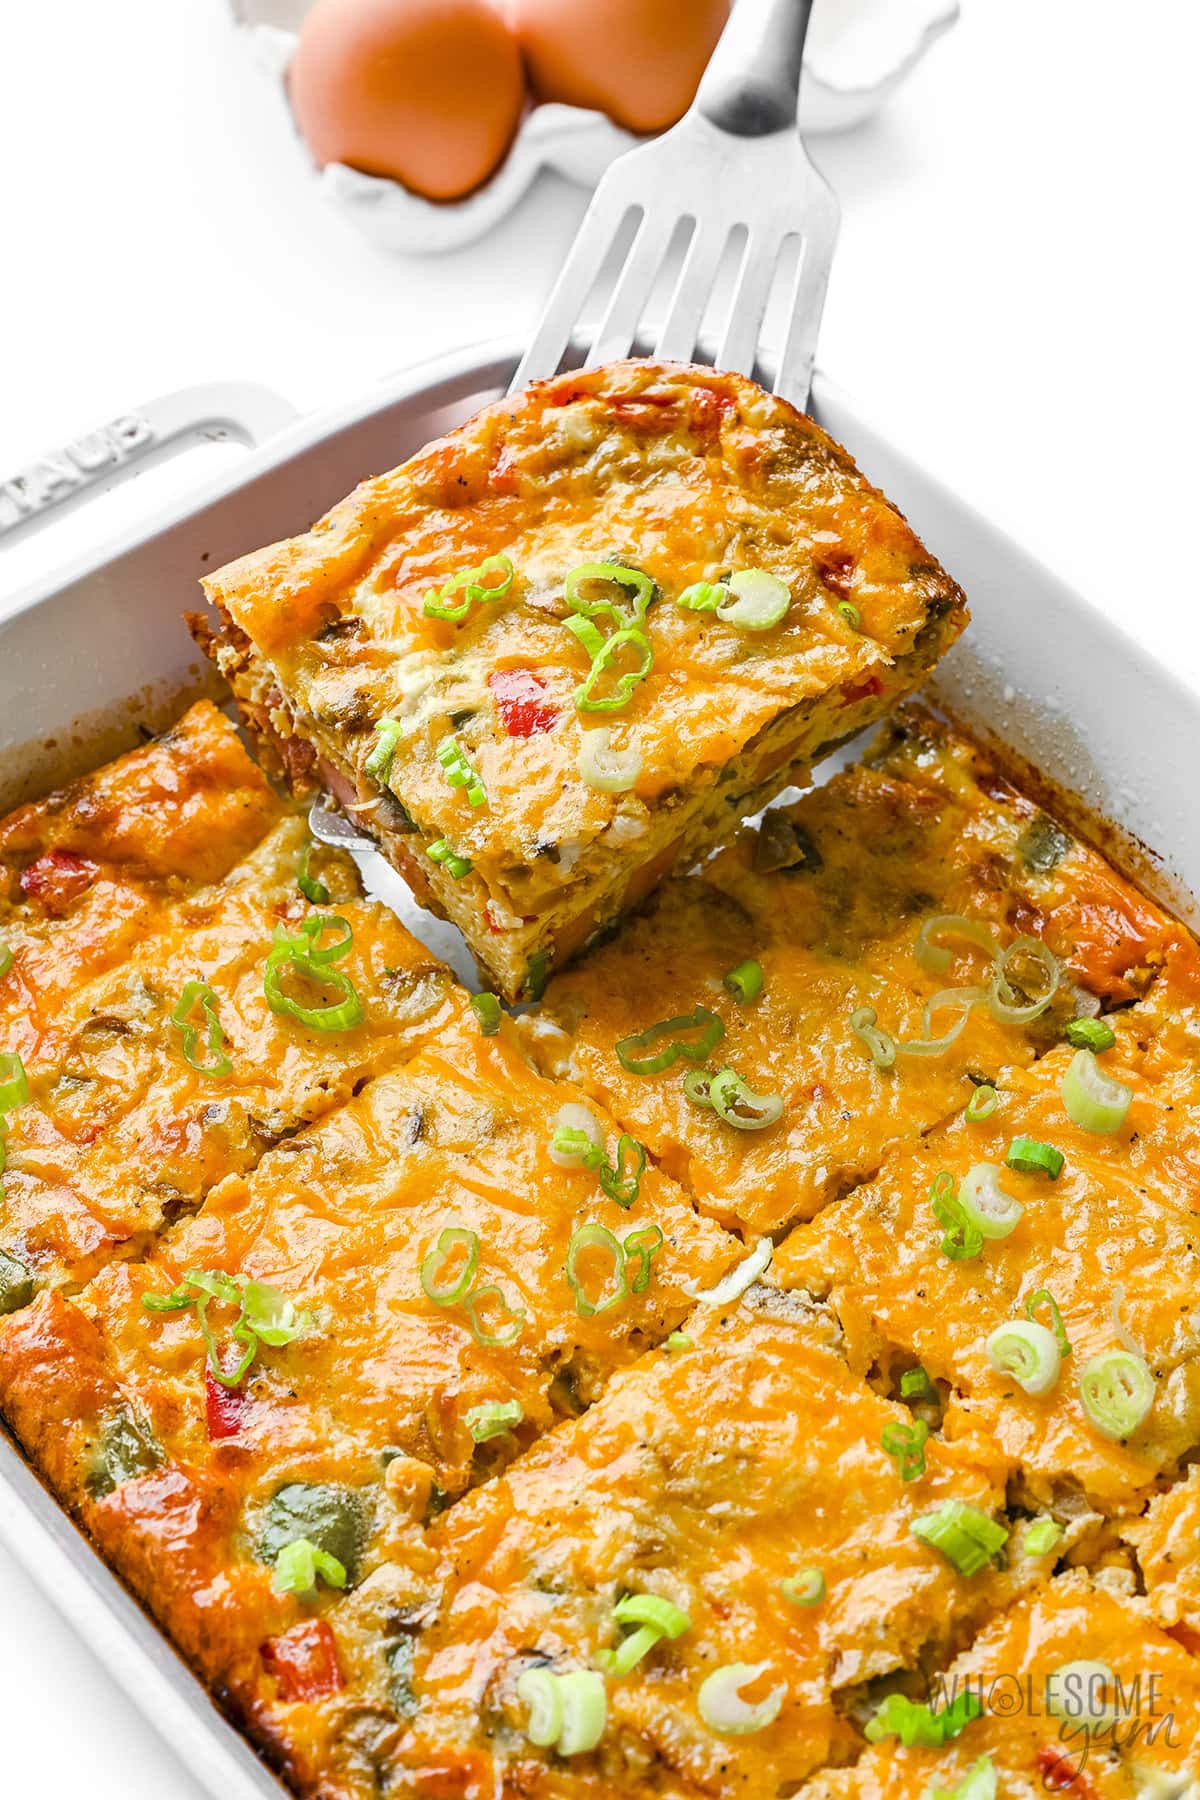 For an easy breakfast casserole, remove the slices with a spatula.